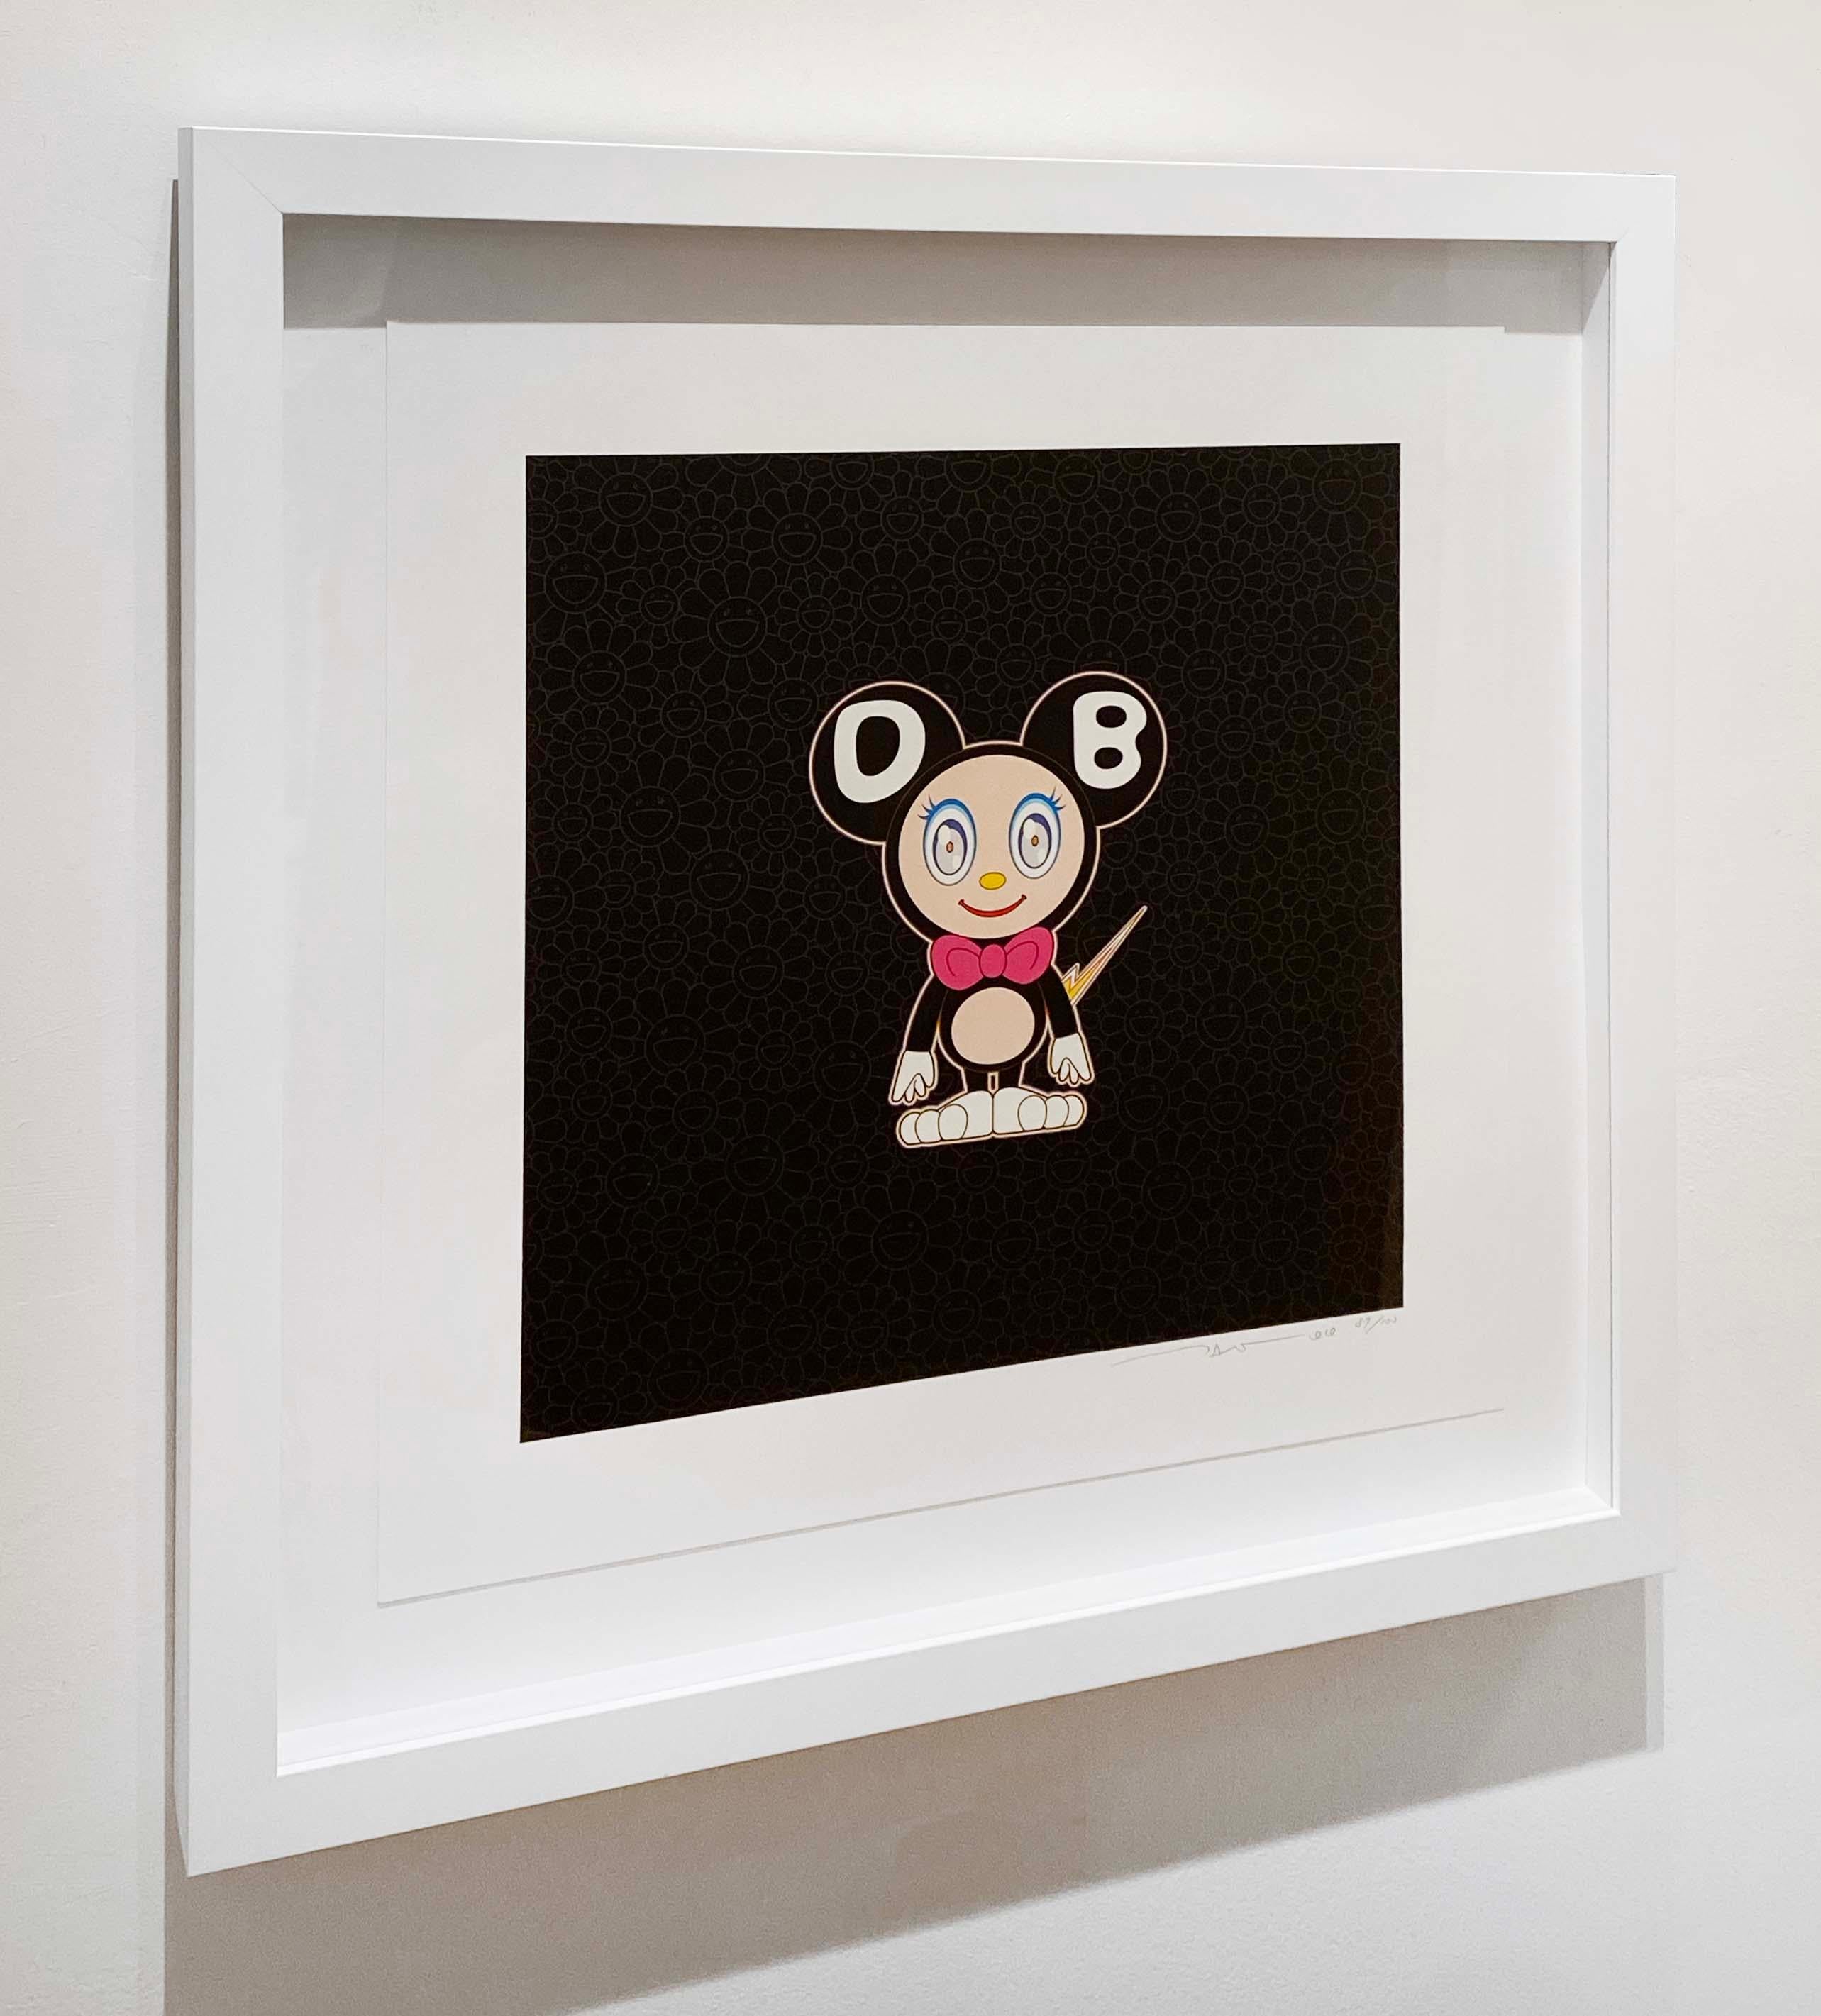 Artist:  Murakami, Takashi
Title:  DOB 2020 BLACK
Date:  2020
Medium:  Offset Lithograph in colors on smooth wove paper
Unframed Dimensions:  18.5